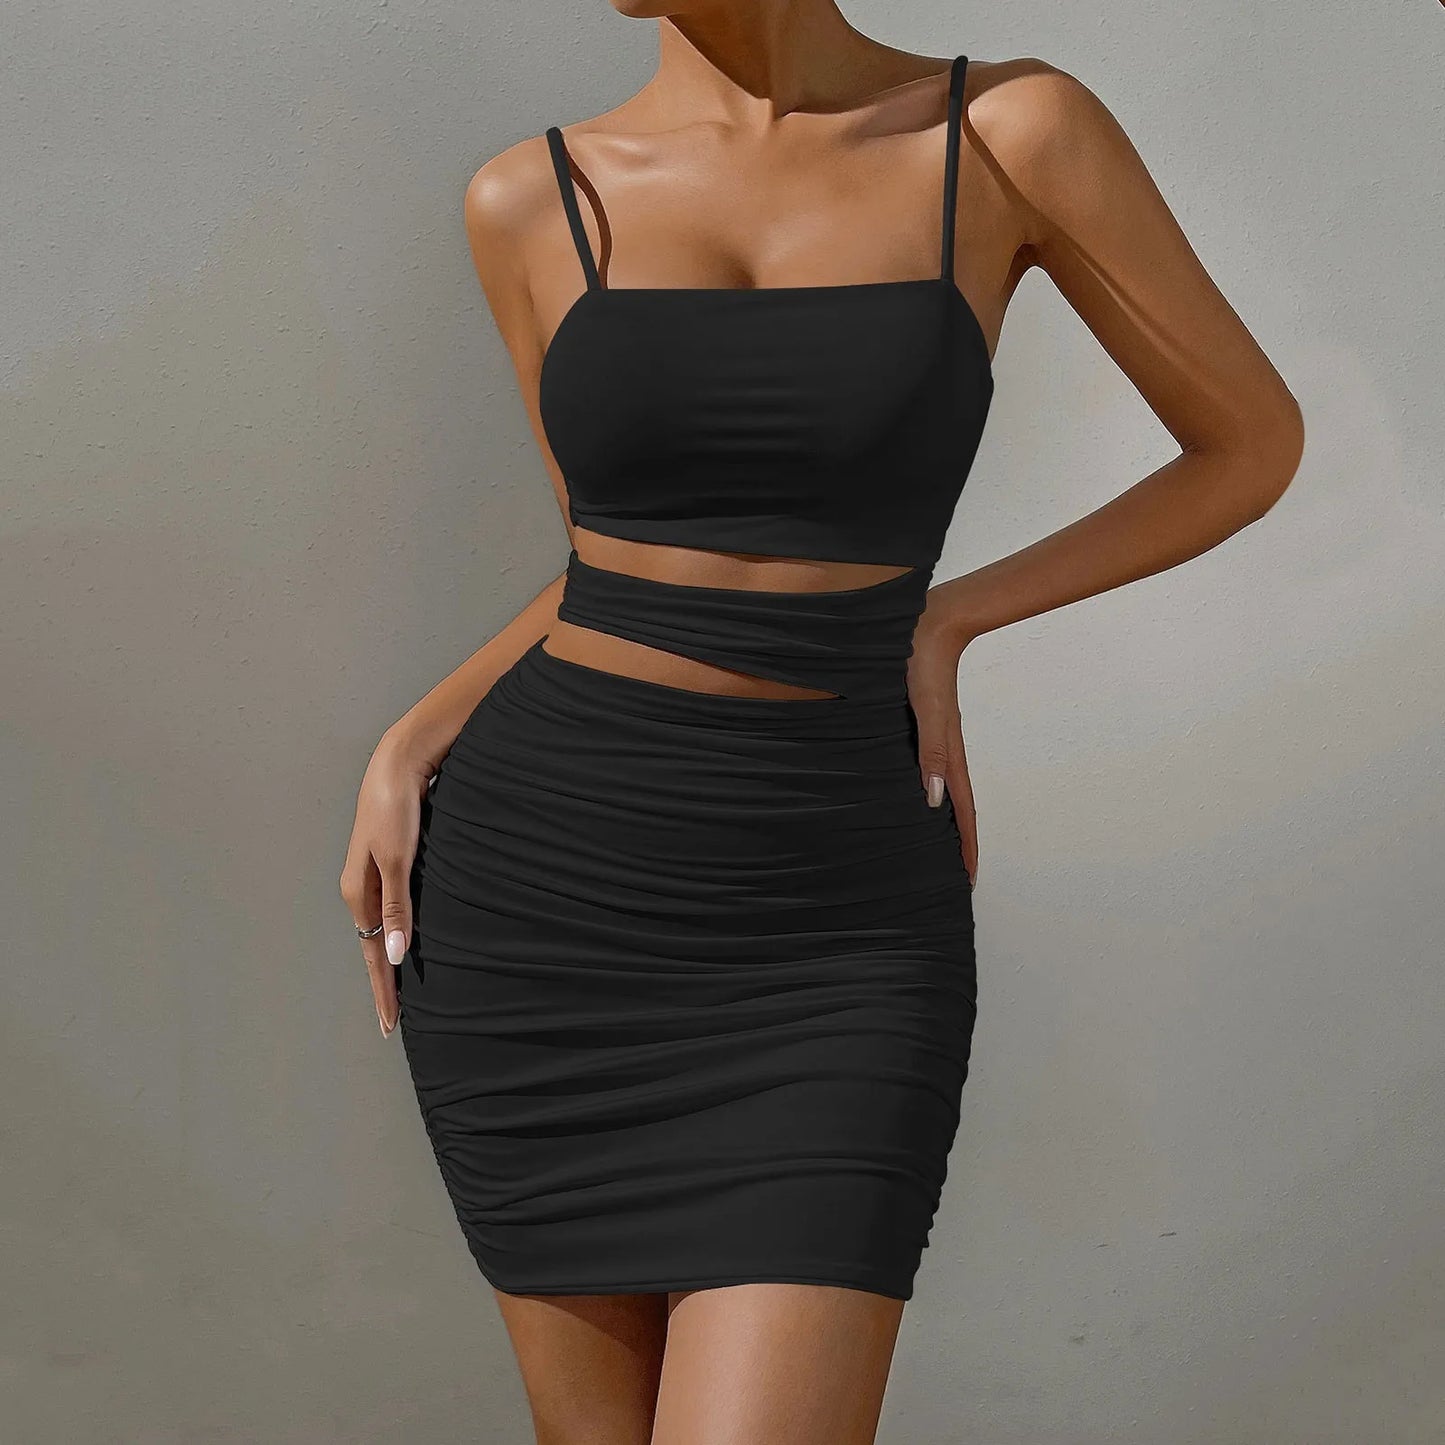 Women's Ruched Bodycon Mini Dress, Sexy Summer Mini Dress Spaghetti Strap Cut Out Ruched Bodycon Dresses For Women Party Tight Sundress Clubwear Party Dress Prom Dress, Wedding Dress, Bridesmaid Dress,  Cocktail Dress, Date Night Dress, Vestidos Mujer, Mini Dress, Exceptional Store.